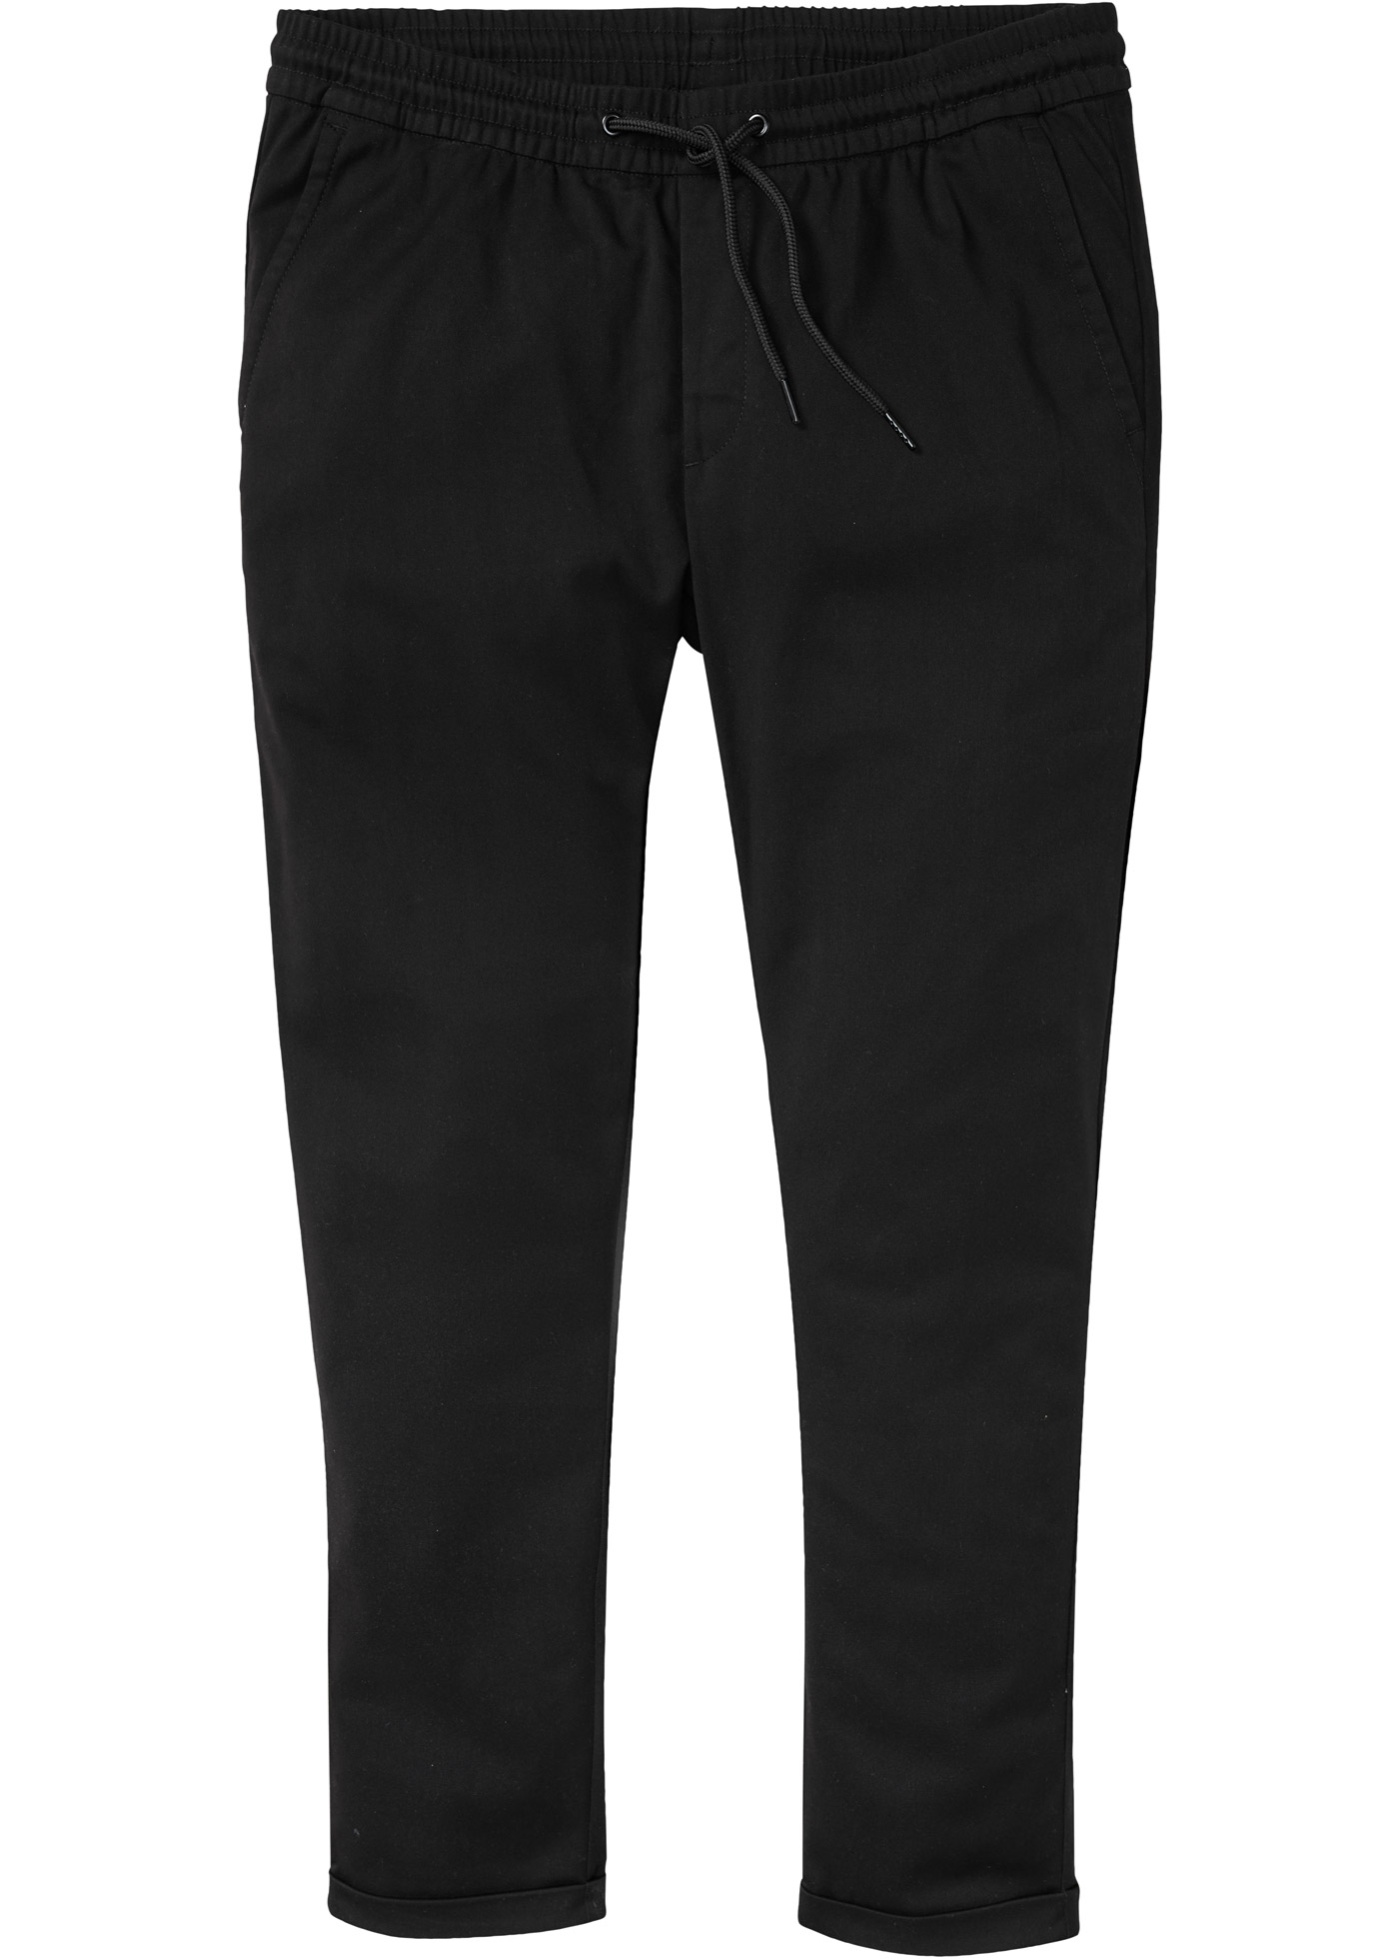 pantalon chino taille extensible slim fit, longueur raccourcie, tapered